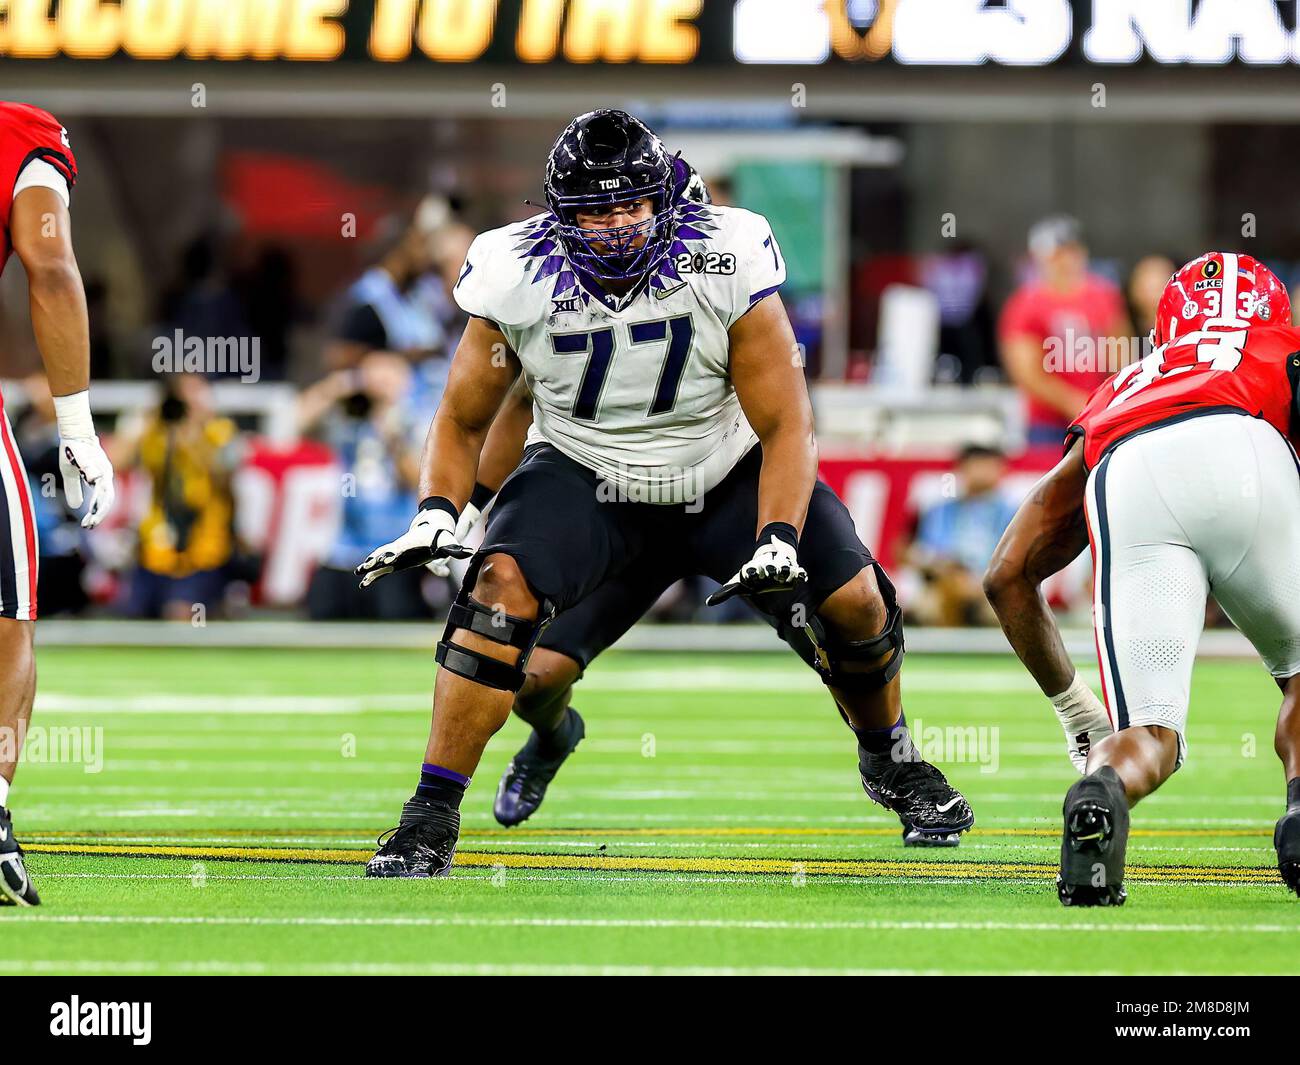 Inglewood, CA. 9th Jan, 2023. TCU Horned Frogs offensive tackle Brandon Coleman (77) looks to block during the College Football Playoff National Championship game between the TCU Horned Frogs and the Georgia Bulldogs on January 9, 2023 at SoFi Stadium in Inglewood, CA. (Mandatory Credit: Freddie Beckwith/MarinMedia.org/Cal Sport Media) (Absolute Complete photographer, and credits required).Television, or For-Profit magazines Contact MarinMedia directly. Credit: csm/Alamy Live News Stock Photo